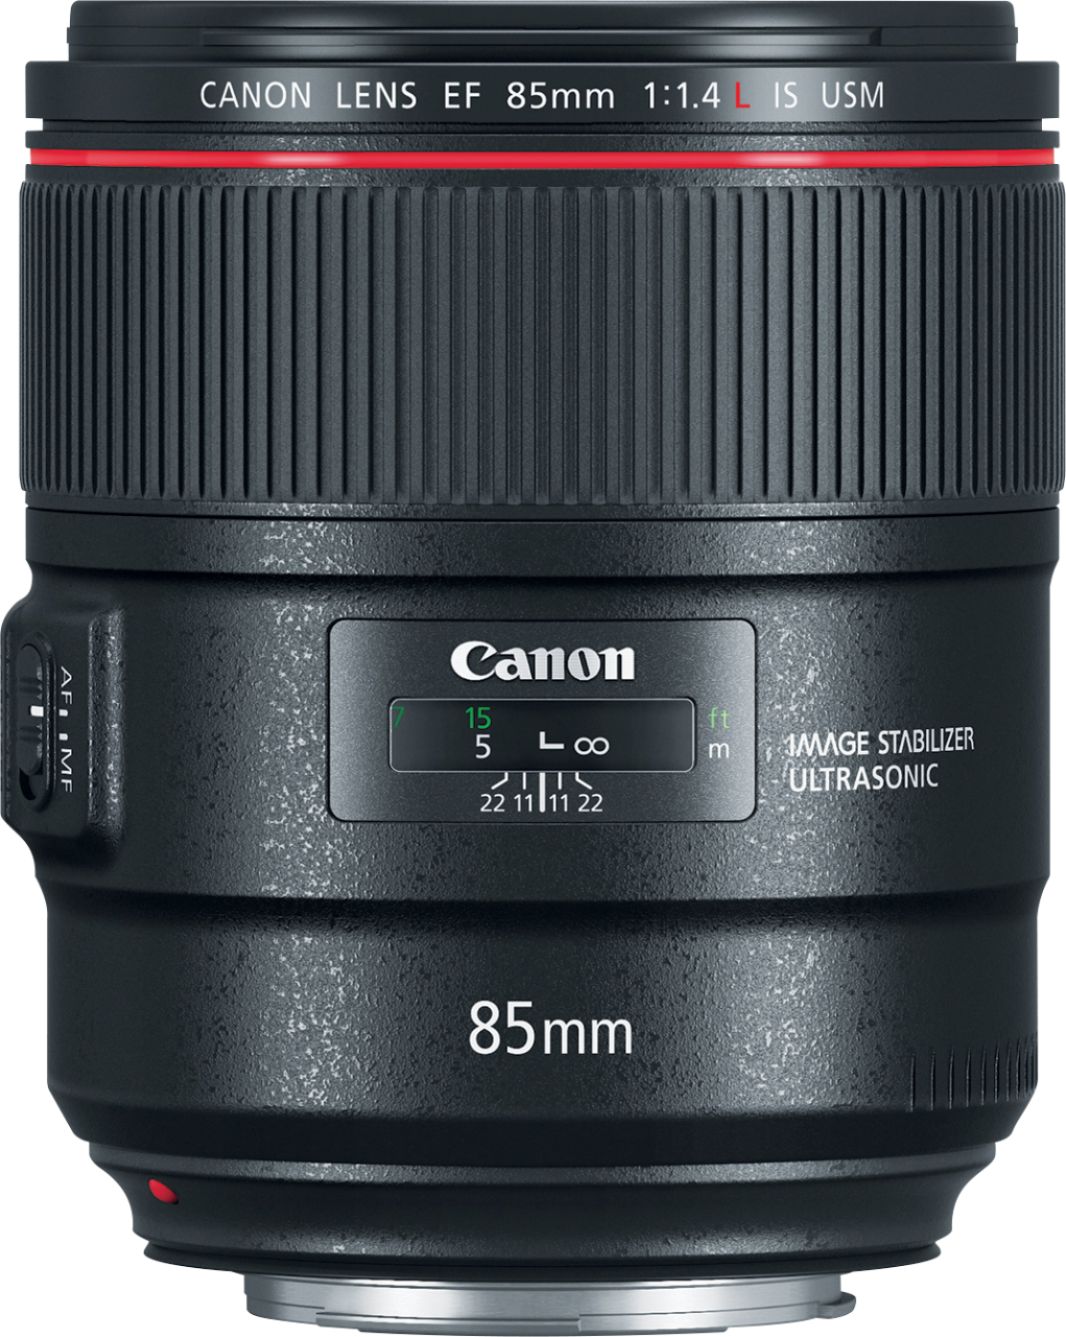 Canon EF85mm F1.4L IS USM Telephoto Lens for EOS DSLR Cameras